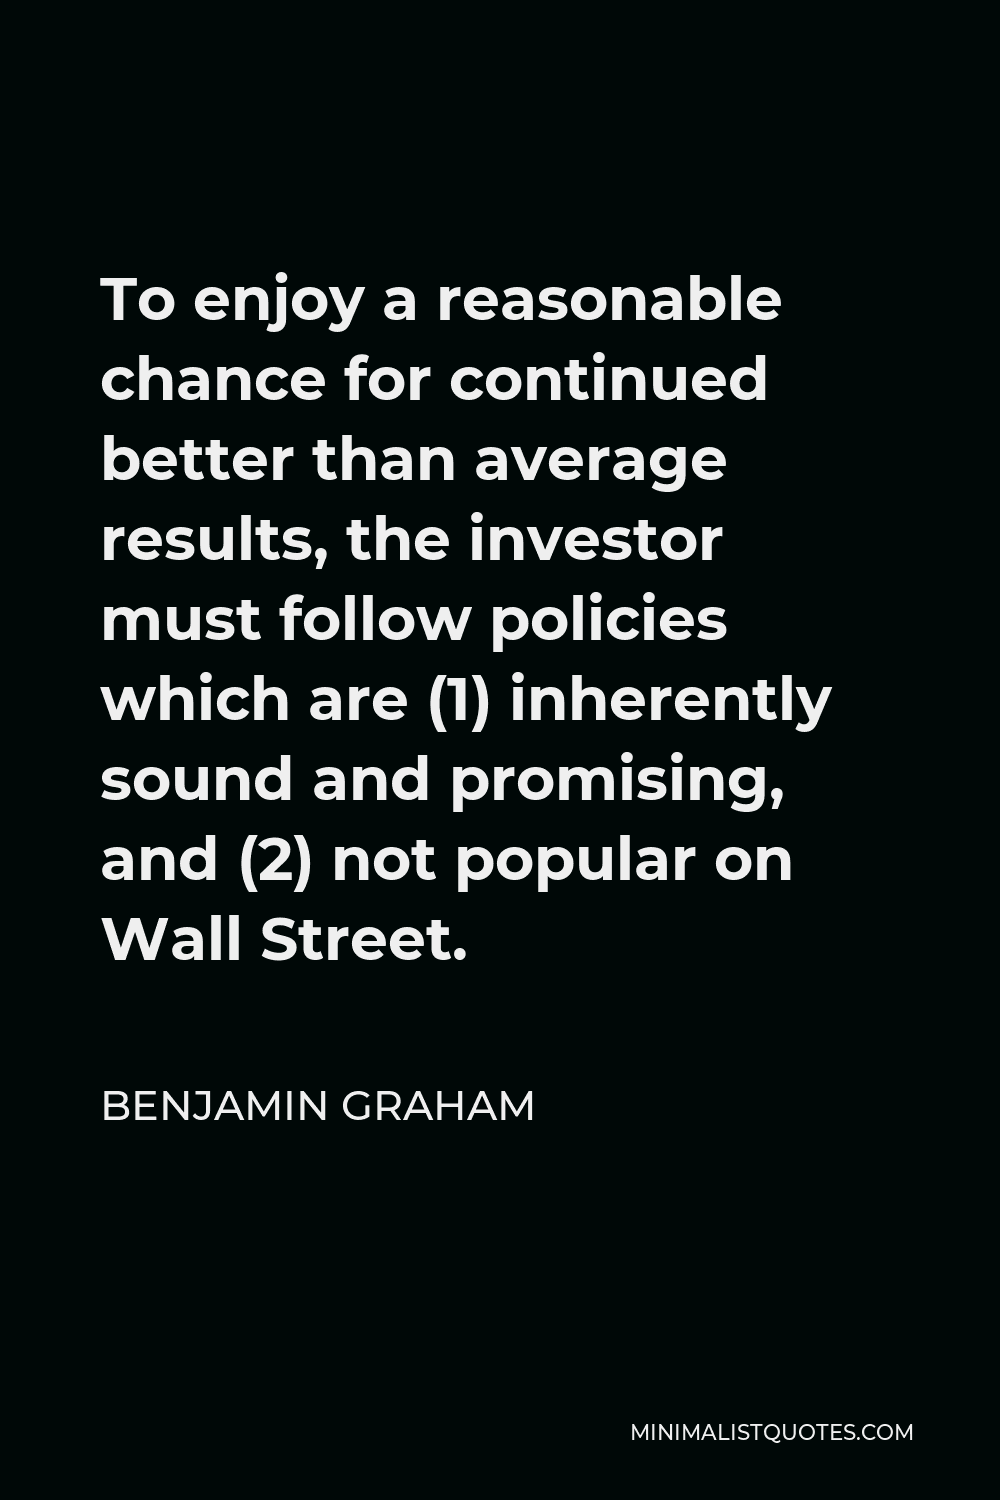 Benjamin Graham Quote - To enjoy a reasonable chance for continued better than average results, the investor must follow policies which are (1) inherently sound and promising, and (2) not popular on Wall Street.